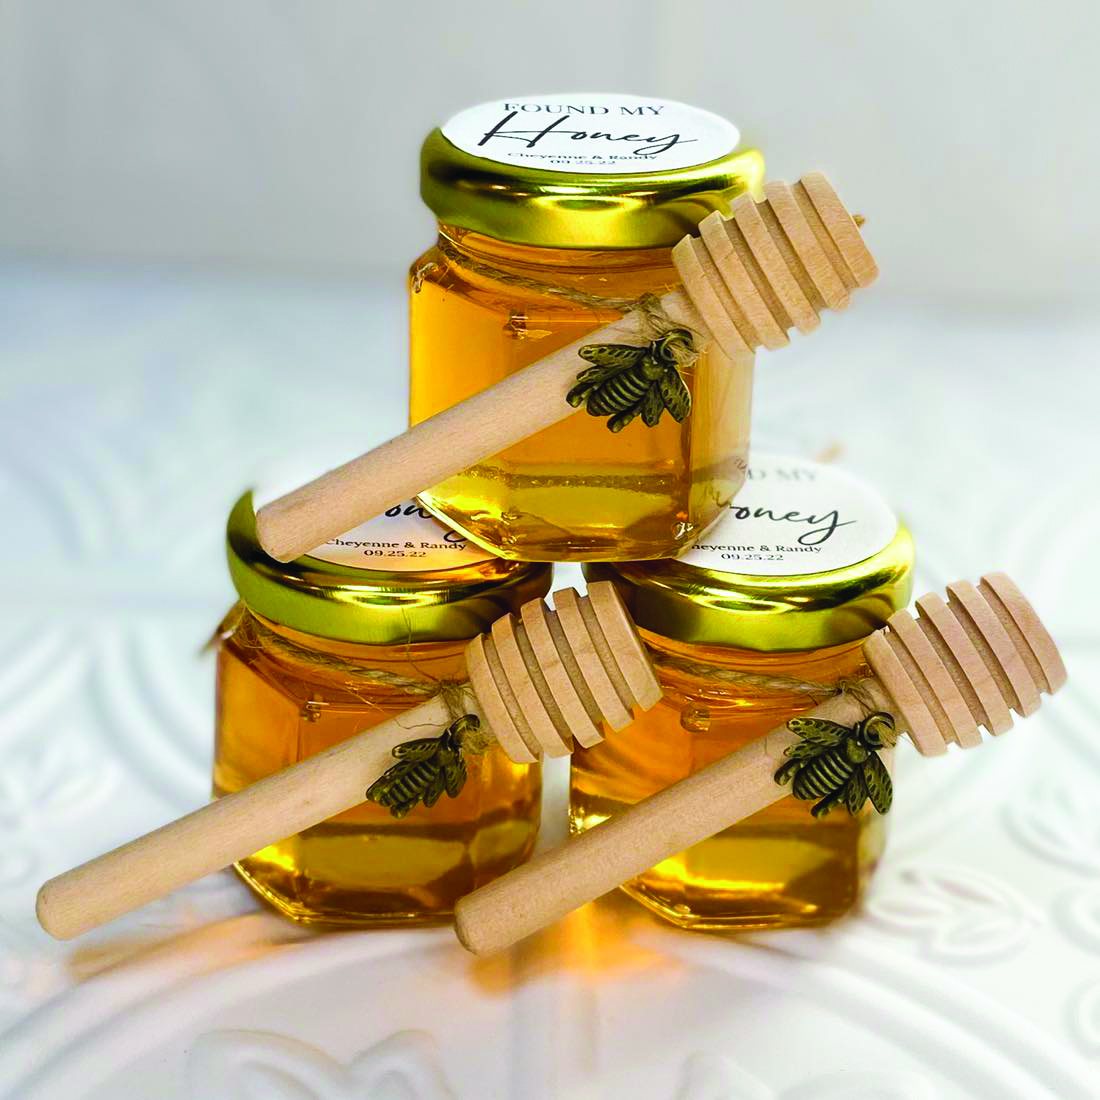 Honey from Z's Bees Apothecary